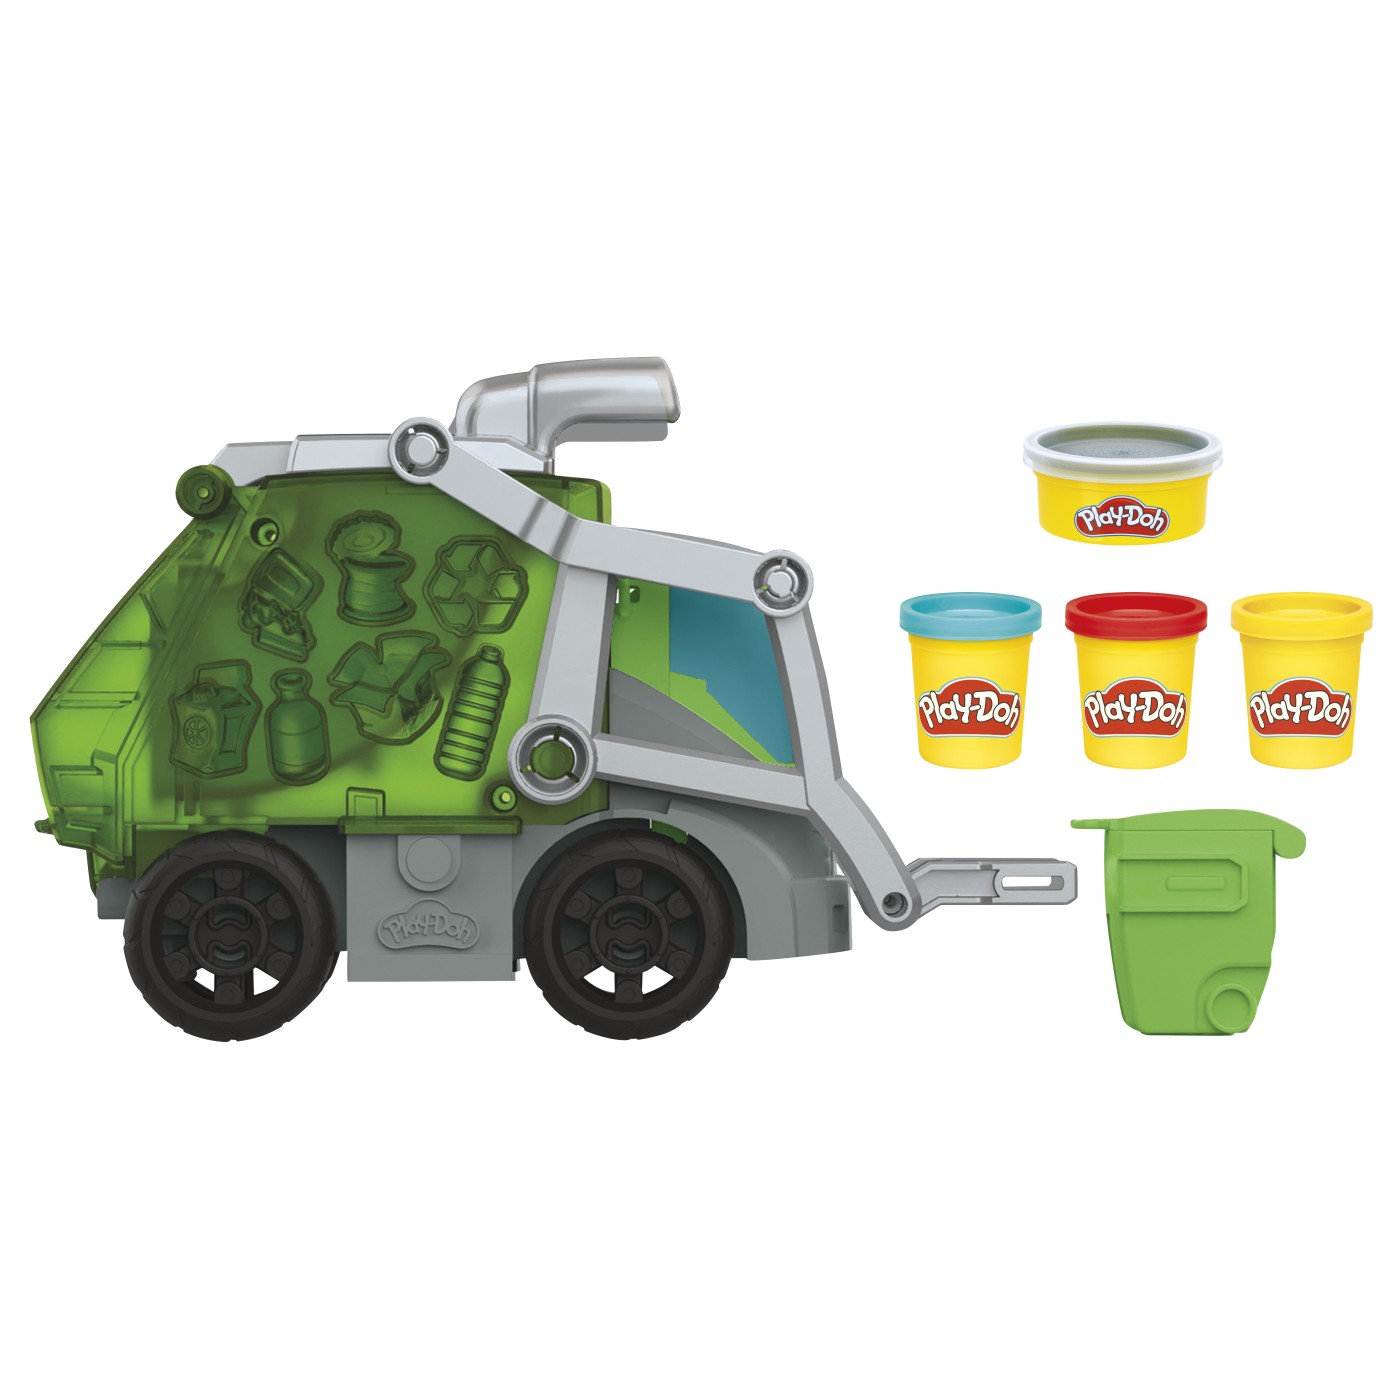 Set Jucarie - Camion Gunoi 2 In 1 | Play-Doh - 1